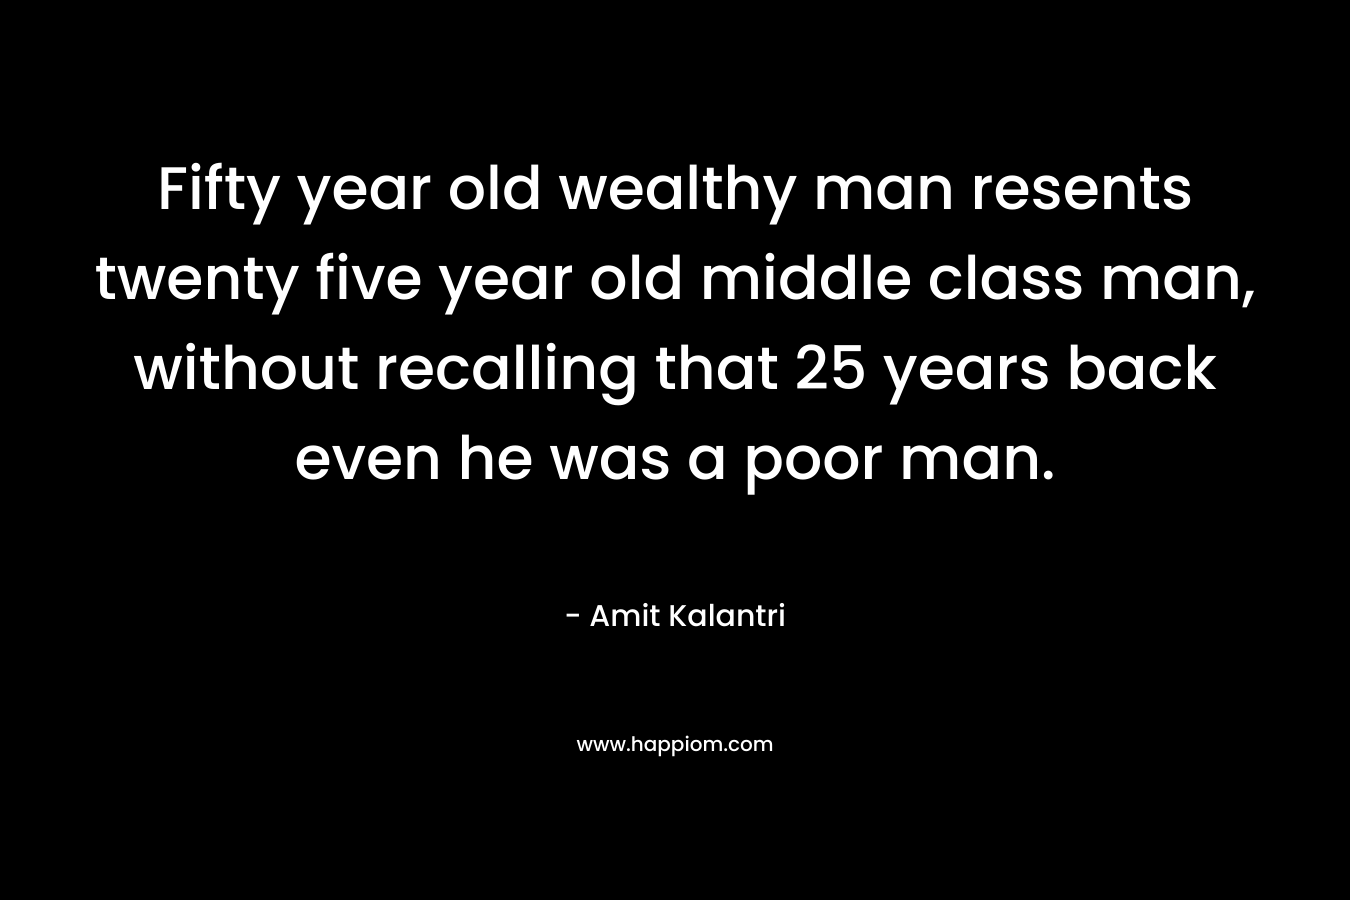 Fifty year old wealthy man resents twenty five year old middle class man, without recalling that 25 years back even he was a poor man.